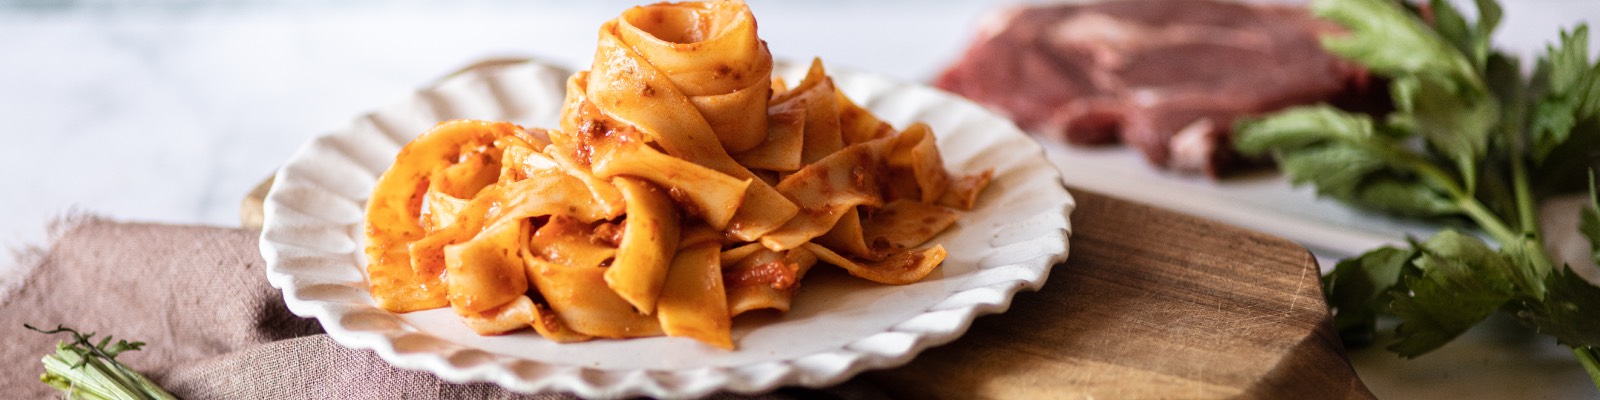 Pasta Garofalo - Pappardelle with Bolognese Sauce